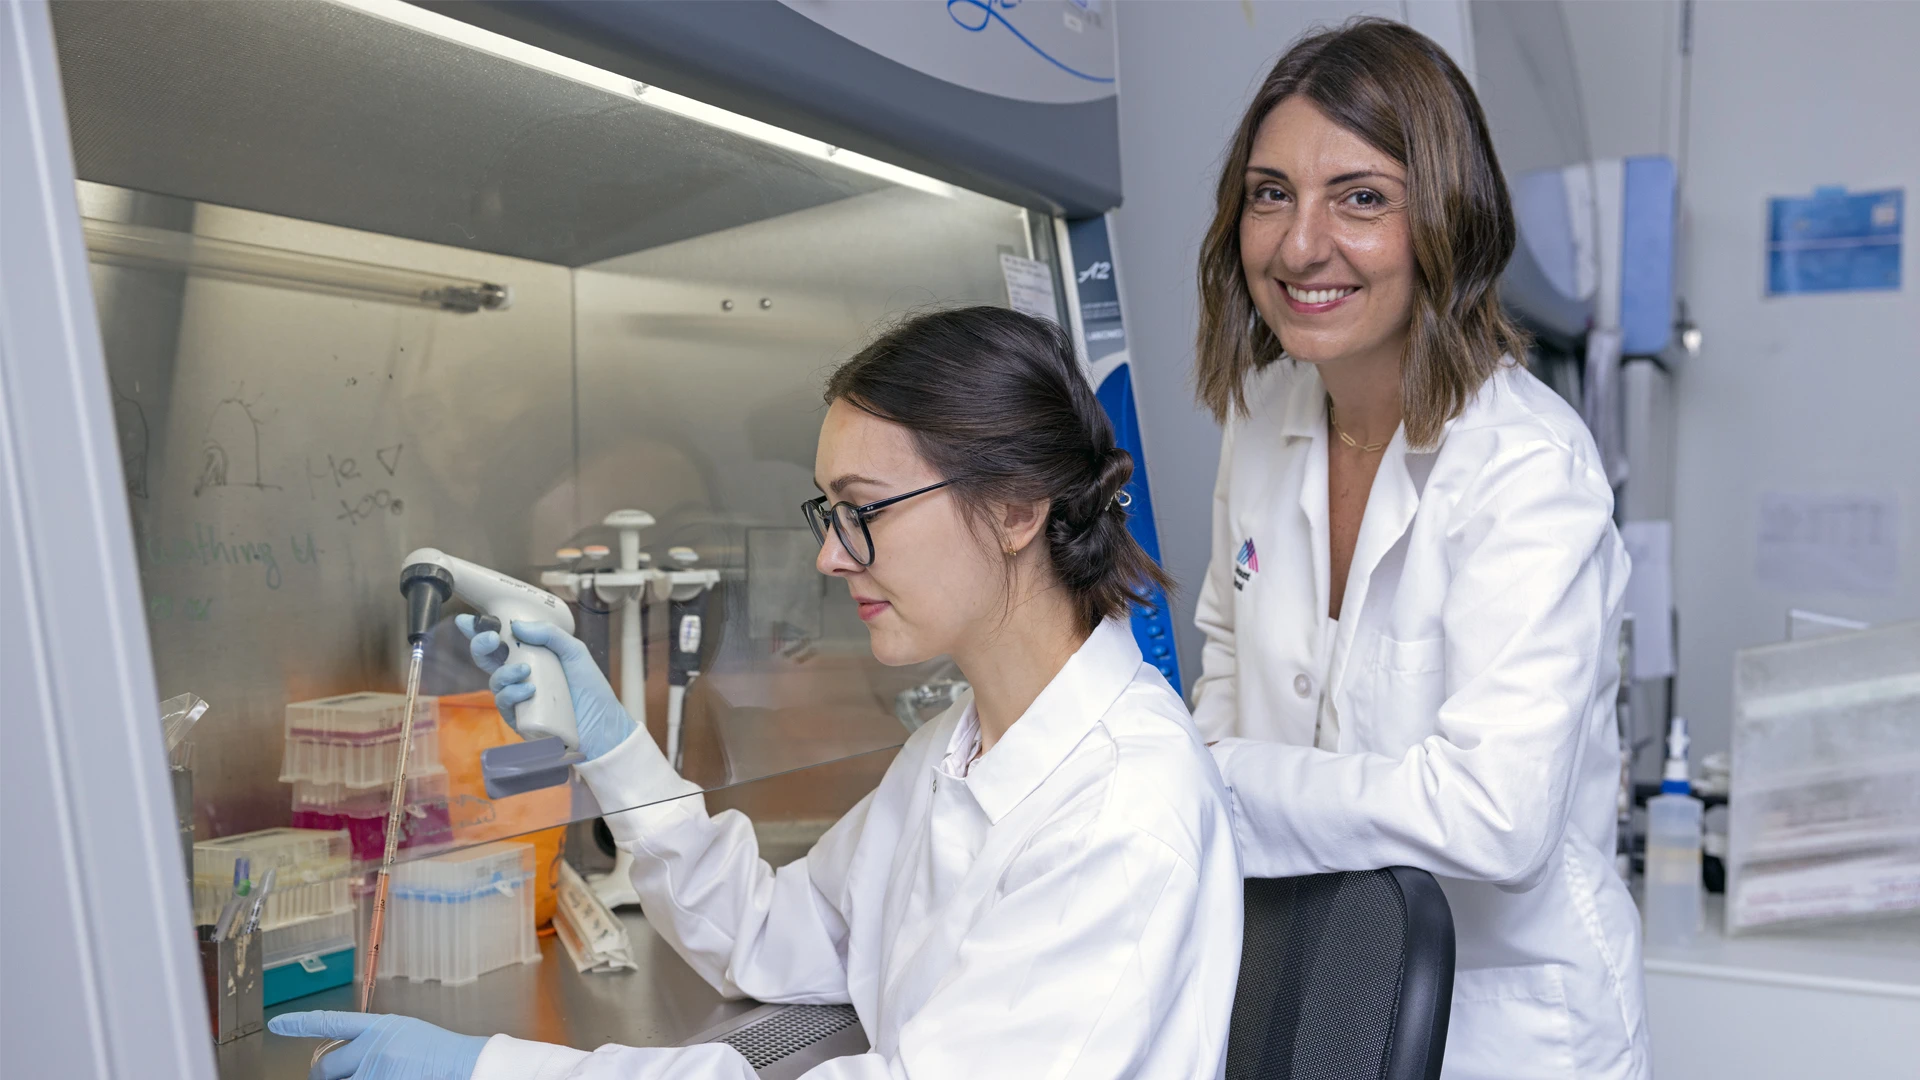 The work from Eirini Papapetrou, MD, PhD, with postdoctoral fellow Leigh-anne Thomas, PhD,  and others, have resulted in the first induced pluripotent stem cell models of myelodysplastic syndrome and acute myeloid leukemia.